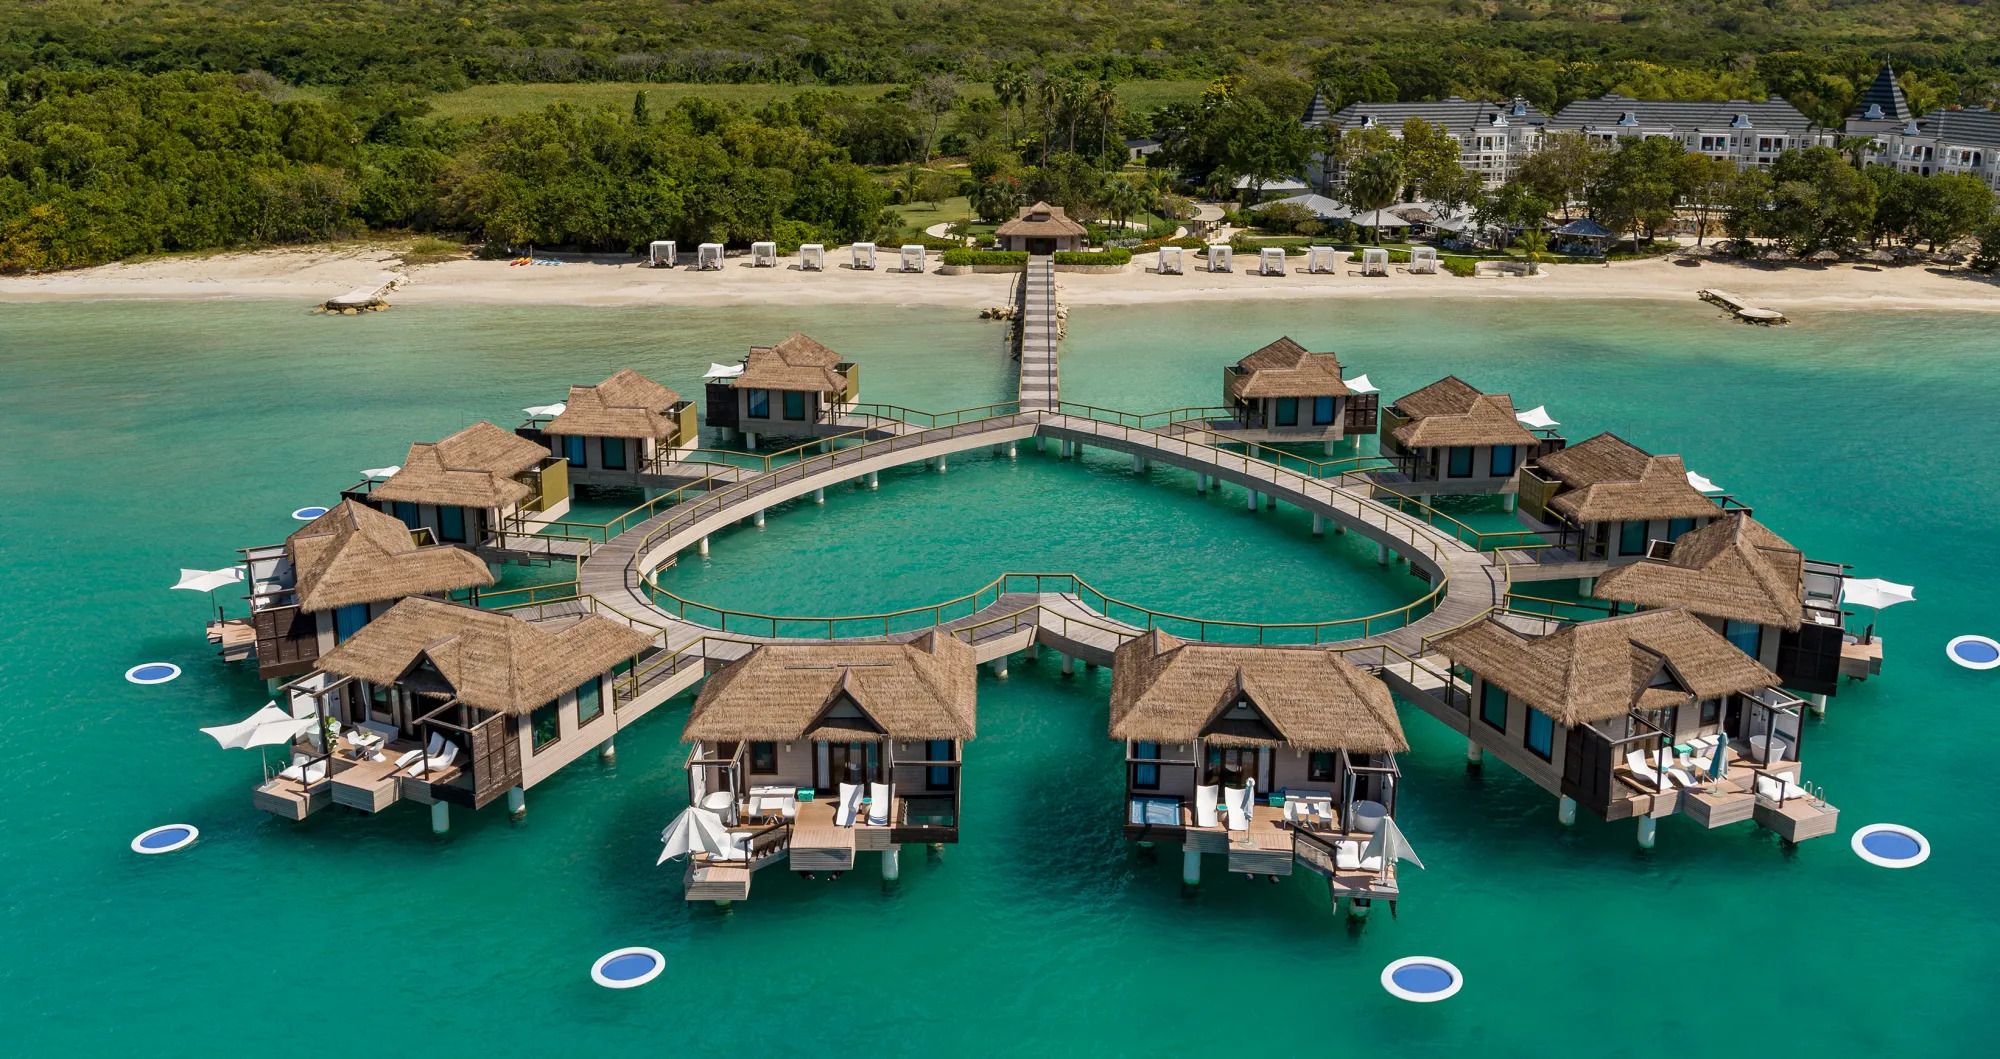 sandals-south-coast-overwater-bungalows-jpg